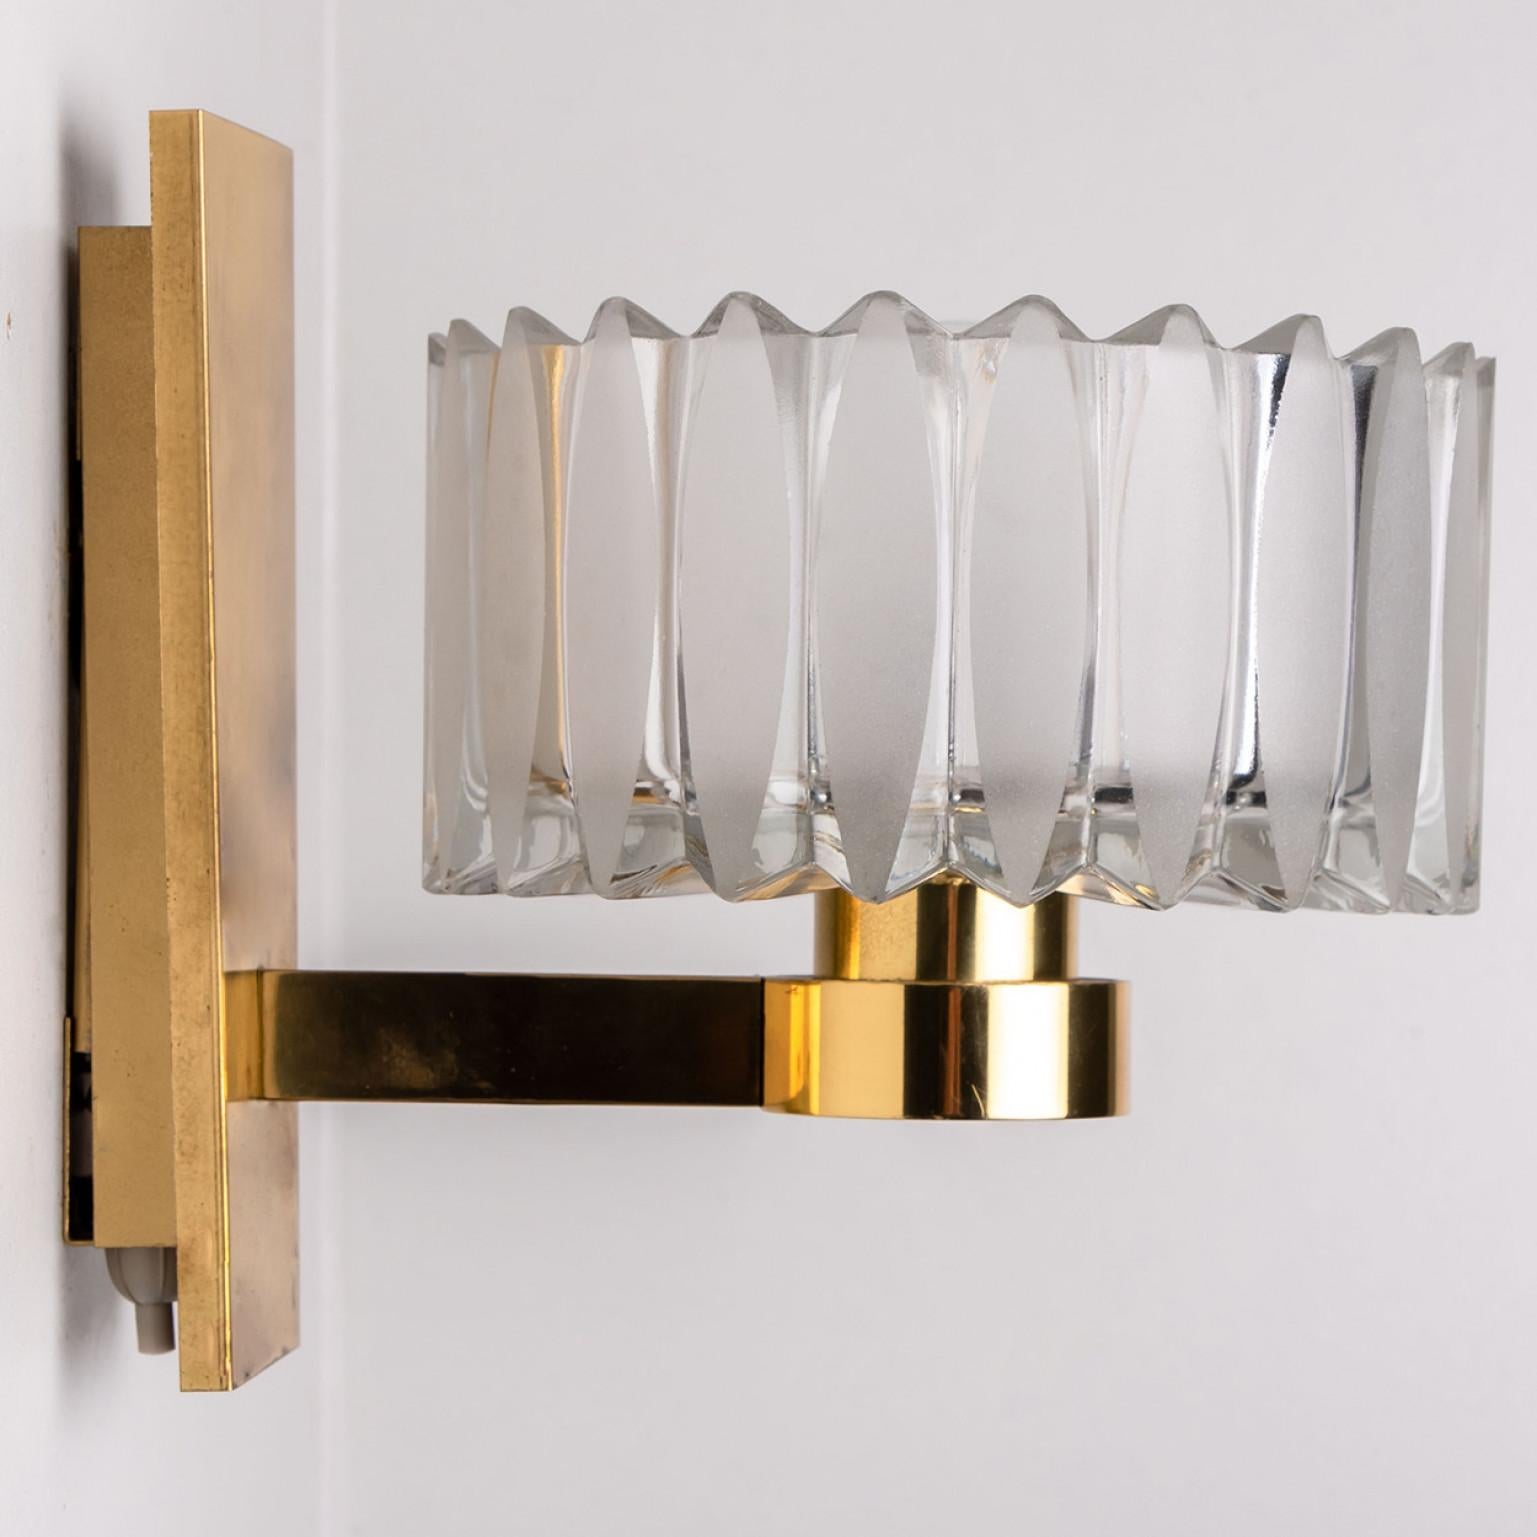 German Pair of Hillebrand Brass and Glass Wall Light Fixtures, 1970s For Sale